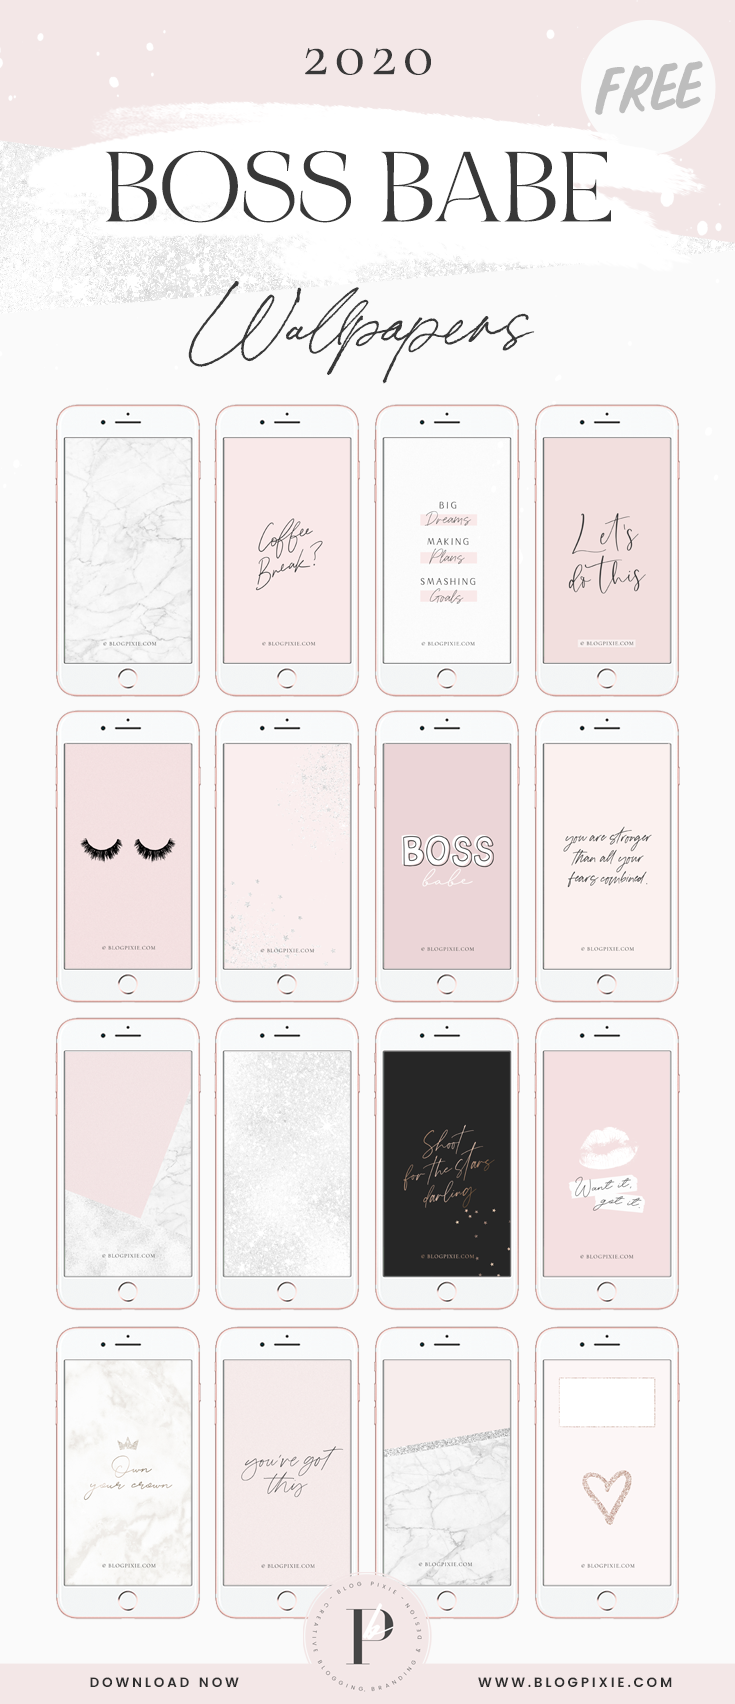 wallpapers free,pink,product,text,material property,rectangle